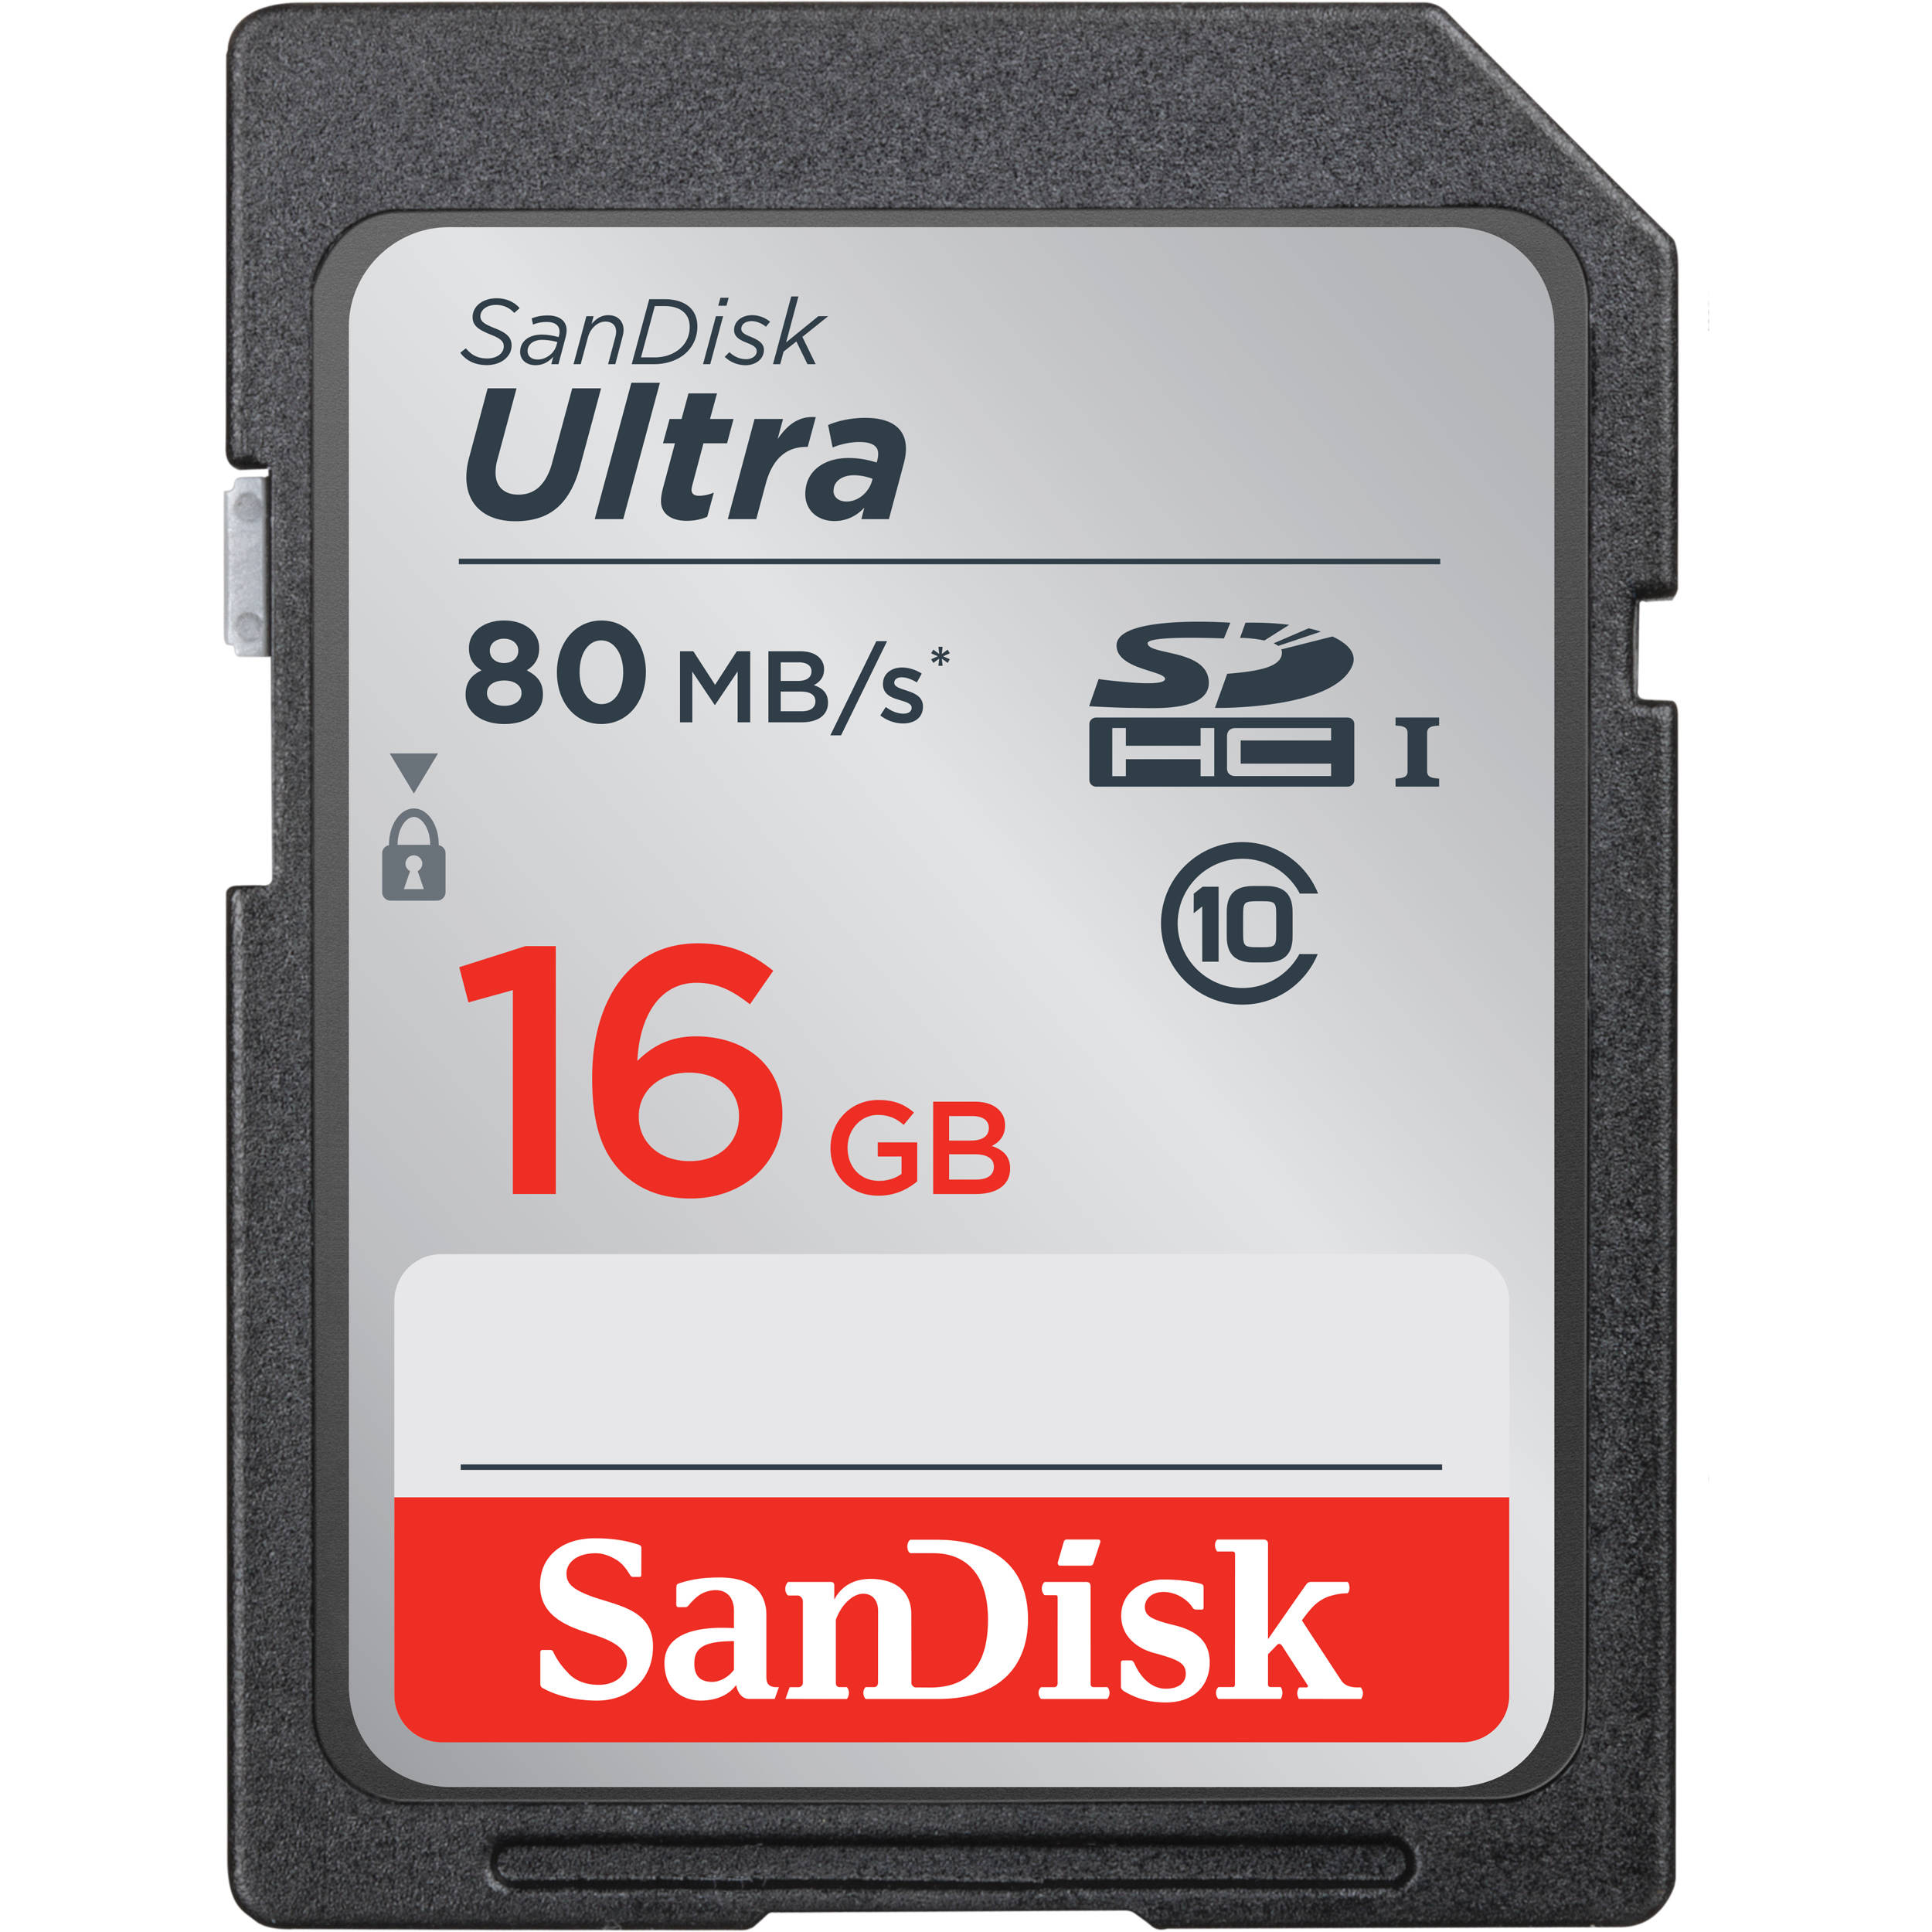 SanDisk SDHC 16GB Ultra 80MBs Class 10 UHS-I